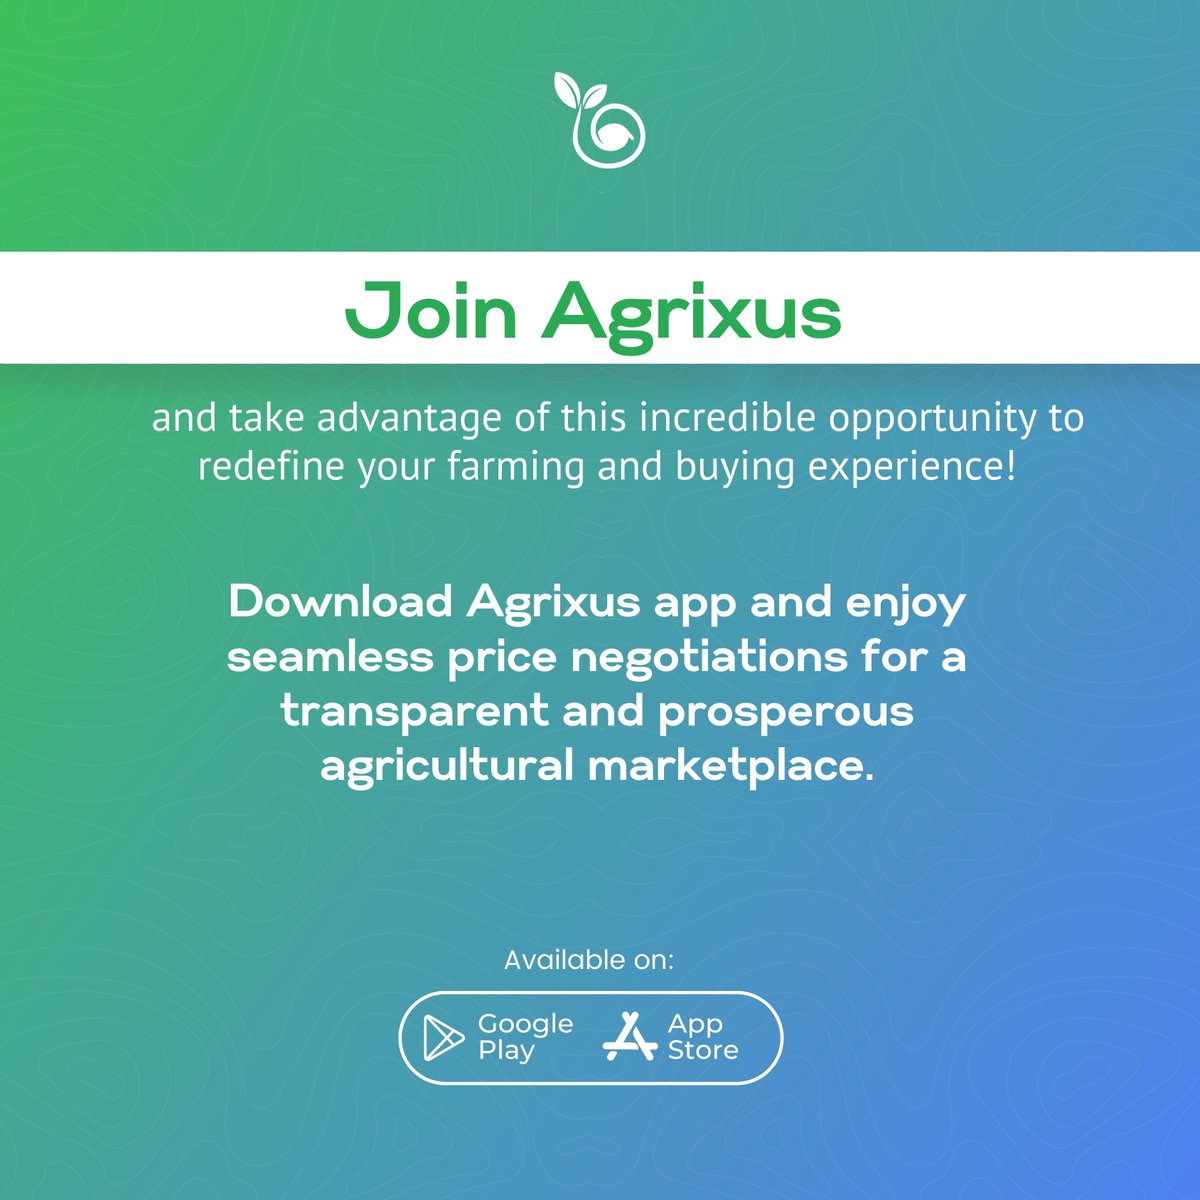 For farmers, this means enhancing sales potential and building lasting relationships with customers.

Download the Agrixus app now!
Available on:
iOS: lnkd.in/dsBtsNRR
Android: lnkd.in/ddQzzK-r

#agrixusconnects #farmersinnigeria #nigerianfarmers #nigeianagriculture